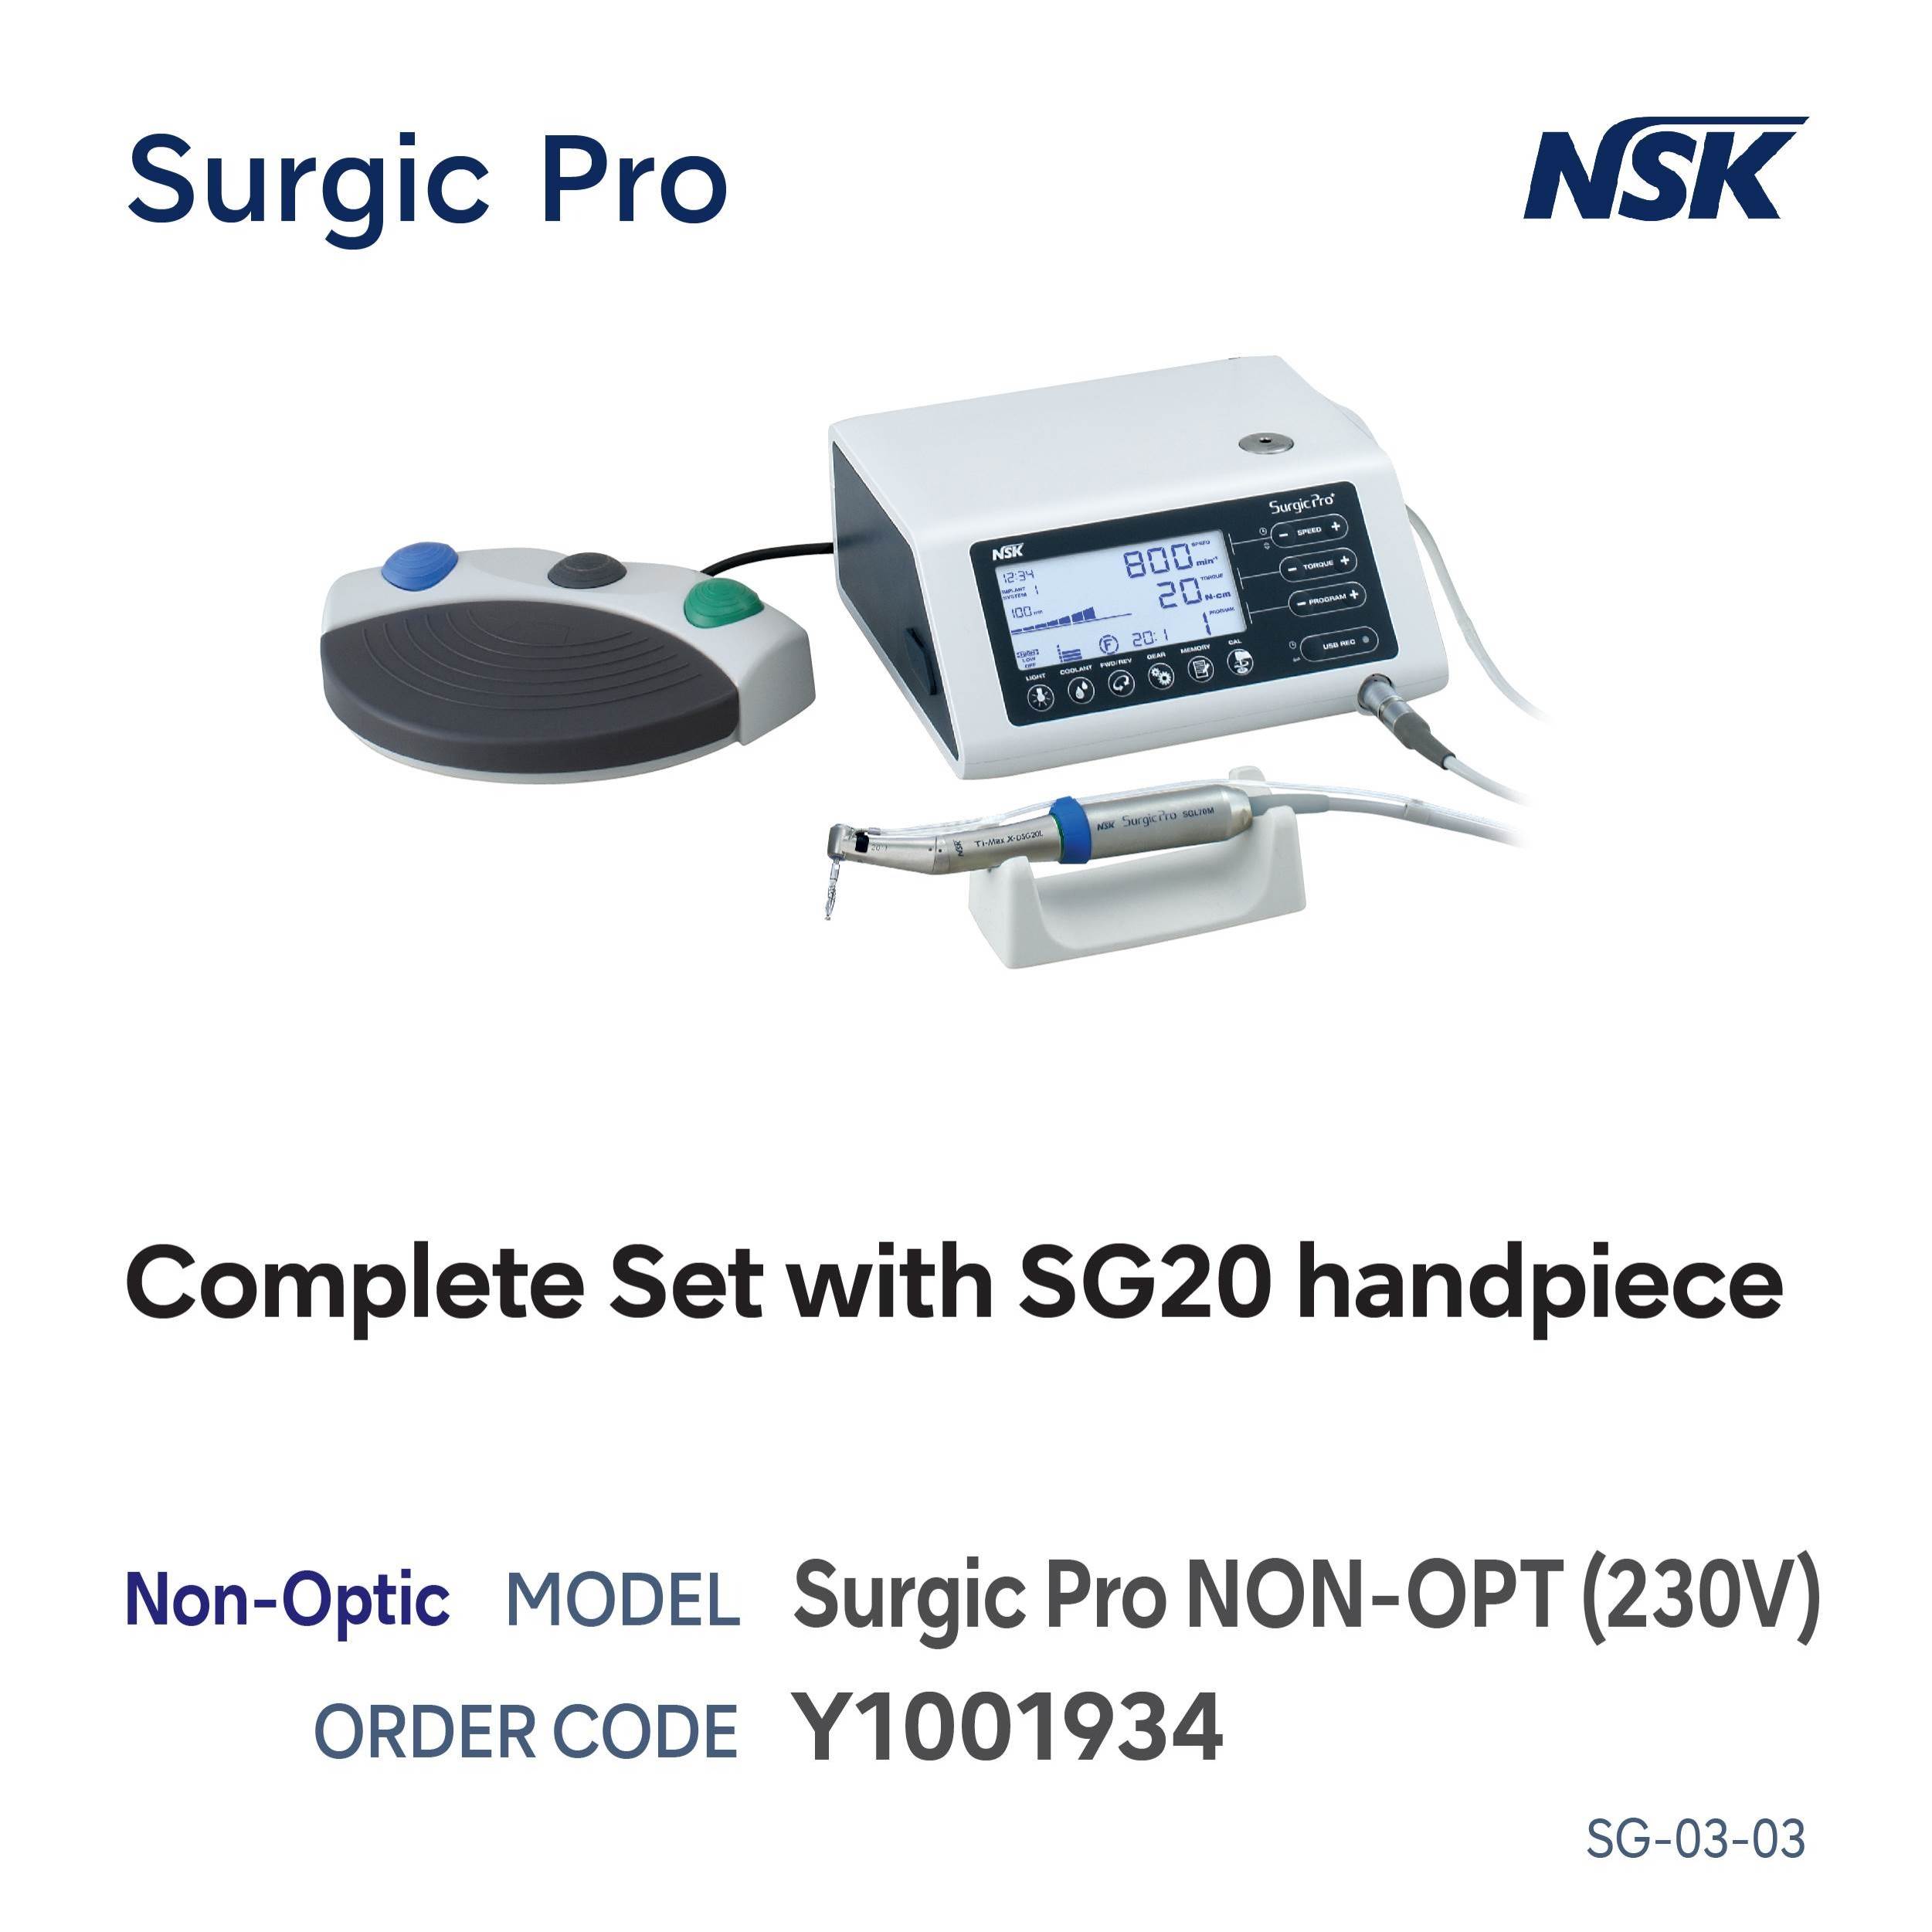 Surgic Pro Non Opt 230V With S Max SG20 Handpiece